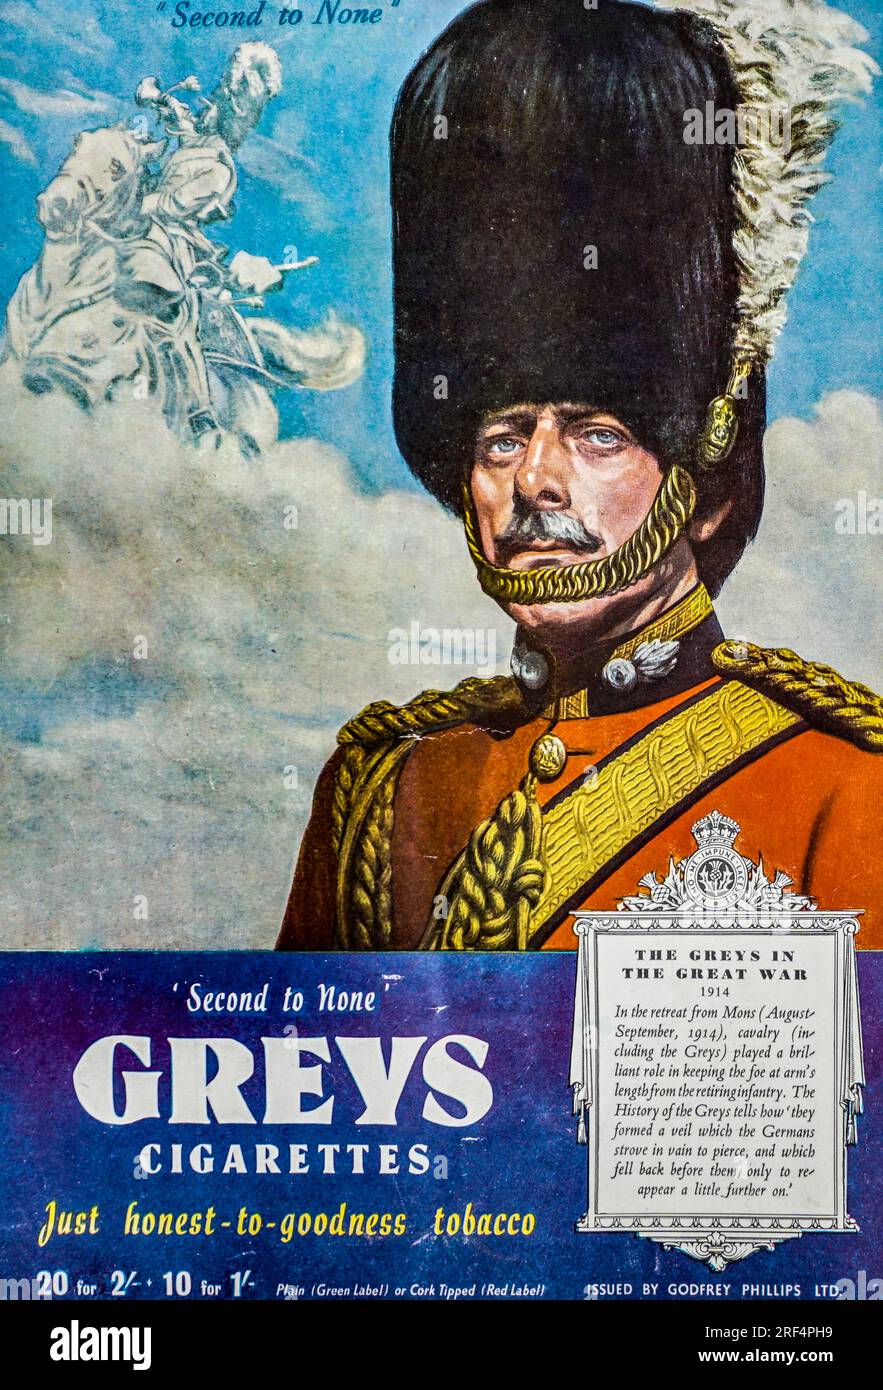 A  1942 advertisement for Greys Cigarettes  featuring a member of The Royal Scots Greys Cavalry Regiment which is now part of The Royal Scots Dragoon Guards. The advertisement carries a reference to one battle The Greys were involved in the First World War.Greys Cigarettes was owned by Major Drapkin  & Co. Which was founded in 1898. The brand enjoyed great success in China and was absorbed into British American Tobacco in 1929. Following the Communist Revolution, western cigarette companies were expelled. Stock Photo